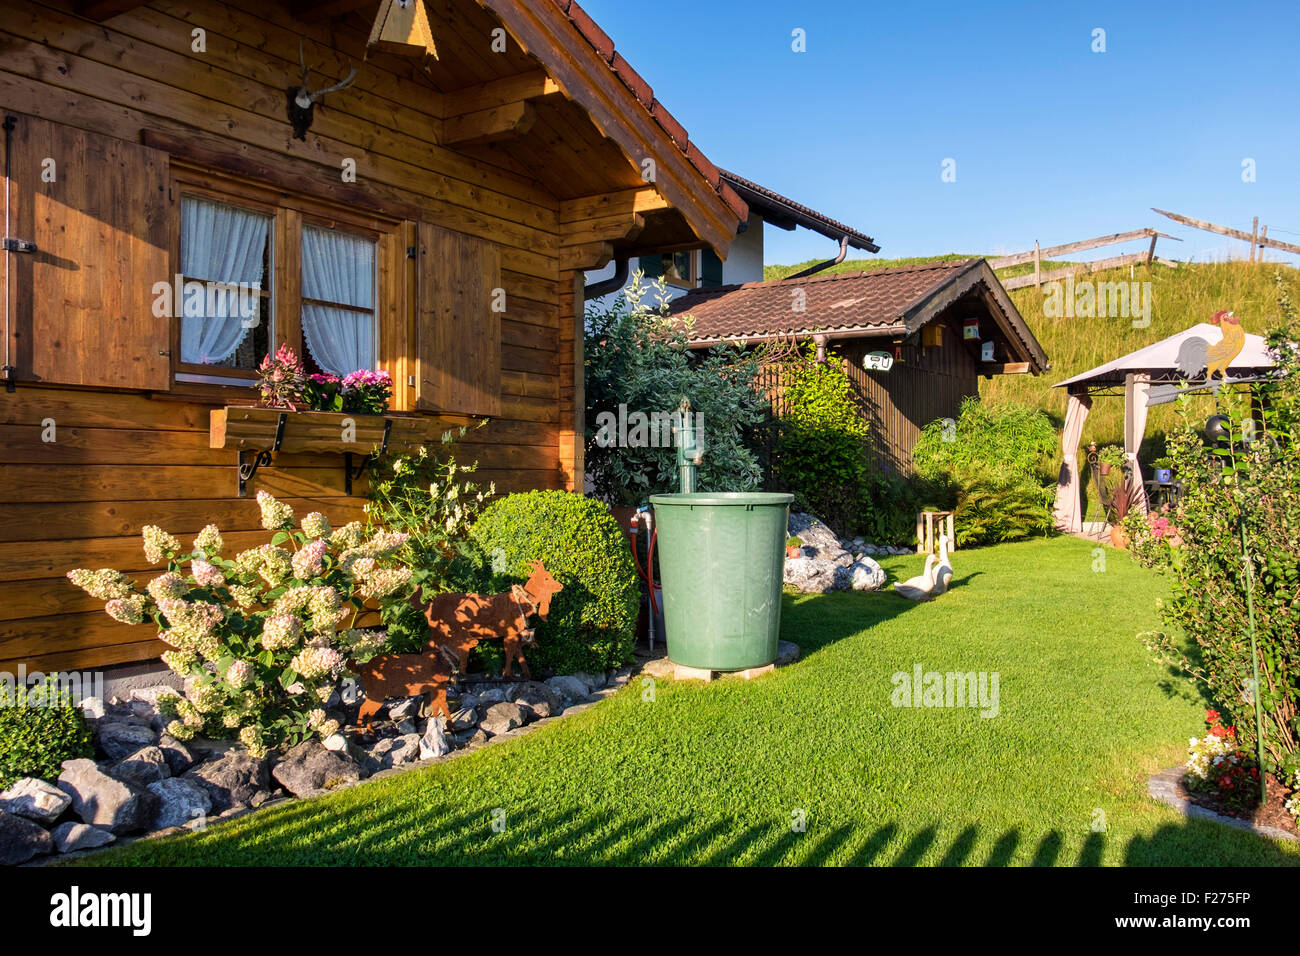 Germany, Bavaria, Typical wooden house exterior and garden ornaments & bird houses Stock Photo